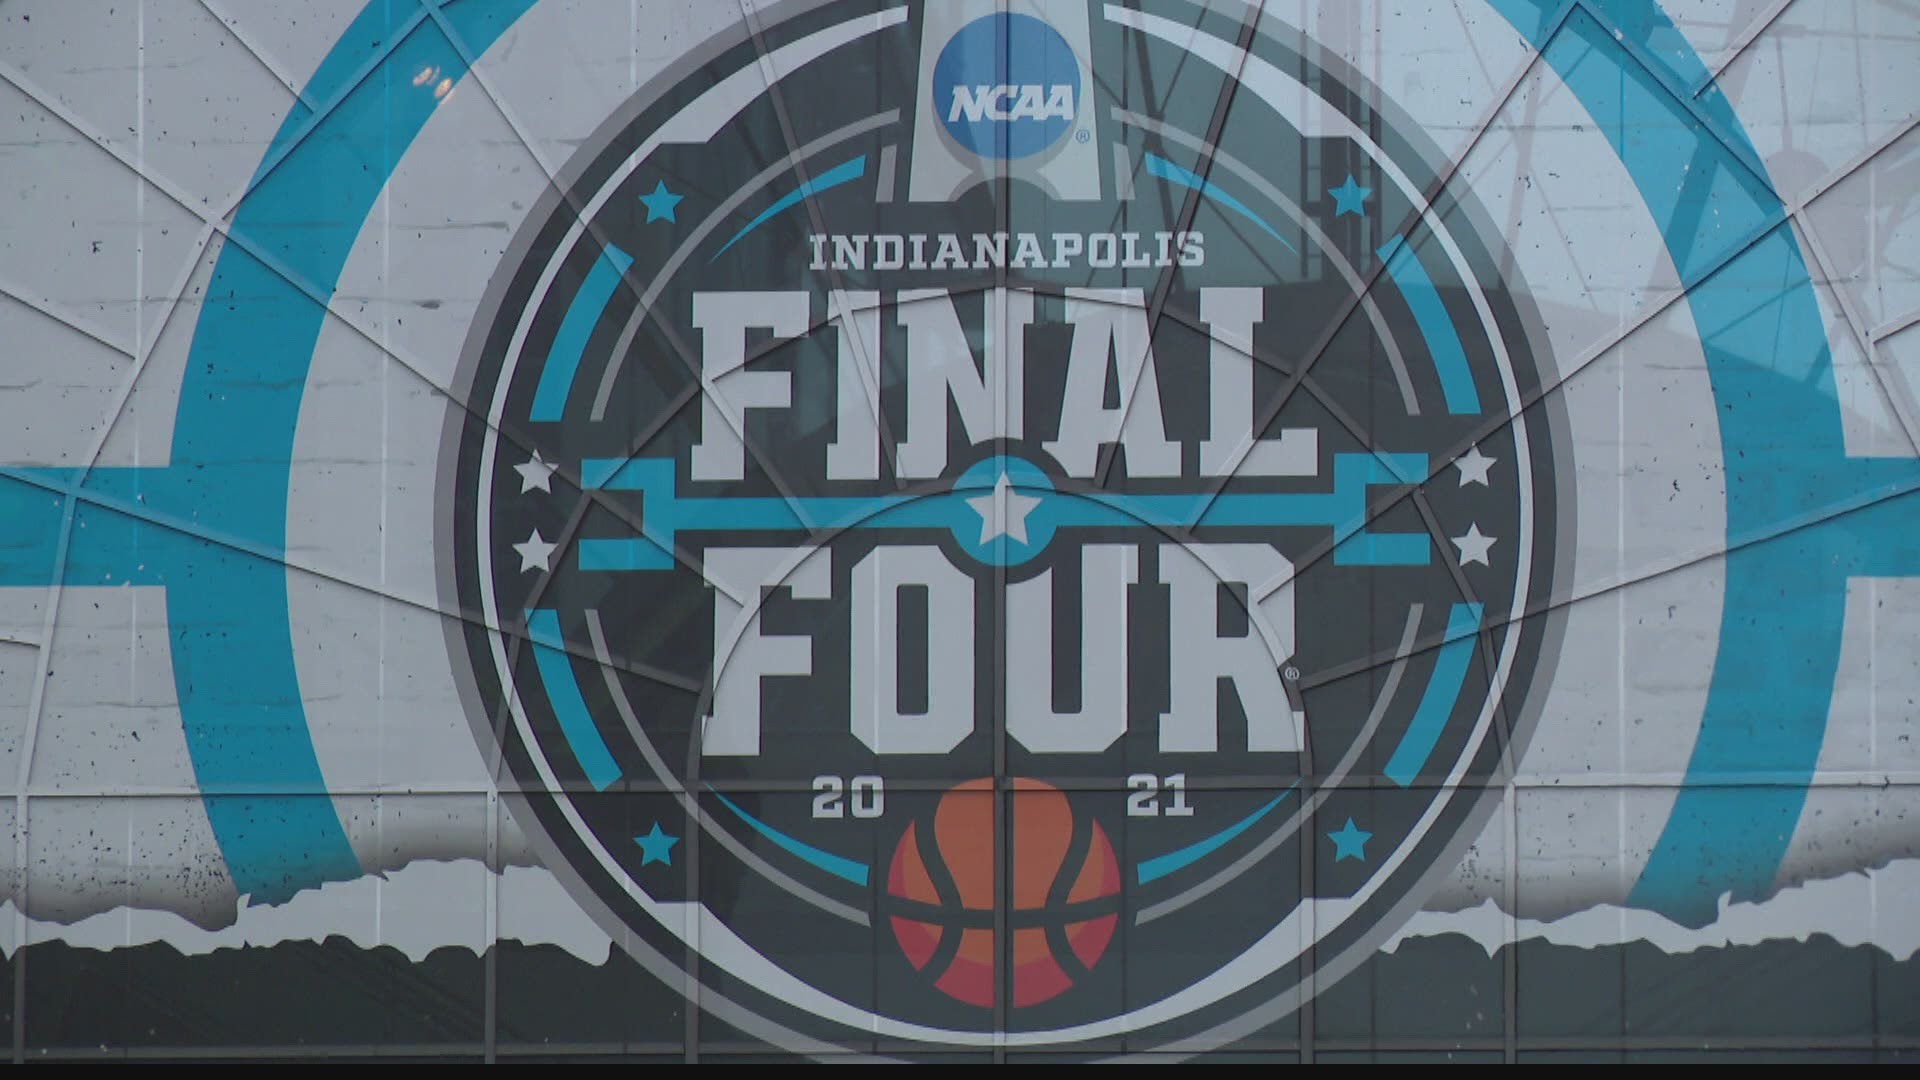 Downtown restaurants are already seeing a spike in business as March Madness tips off.